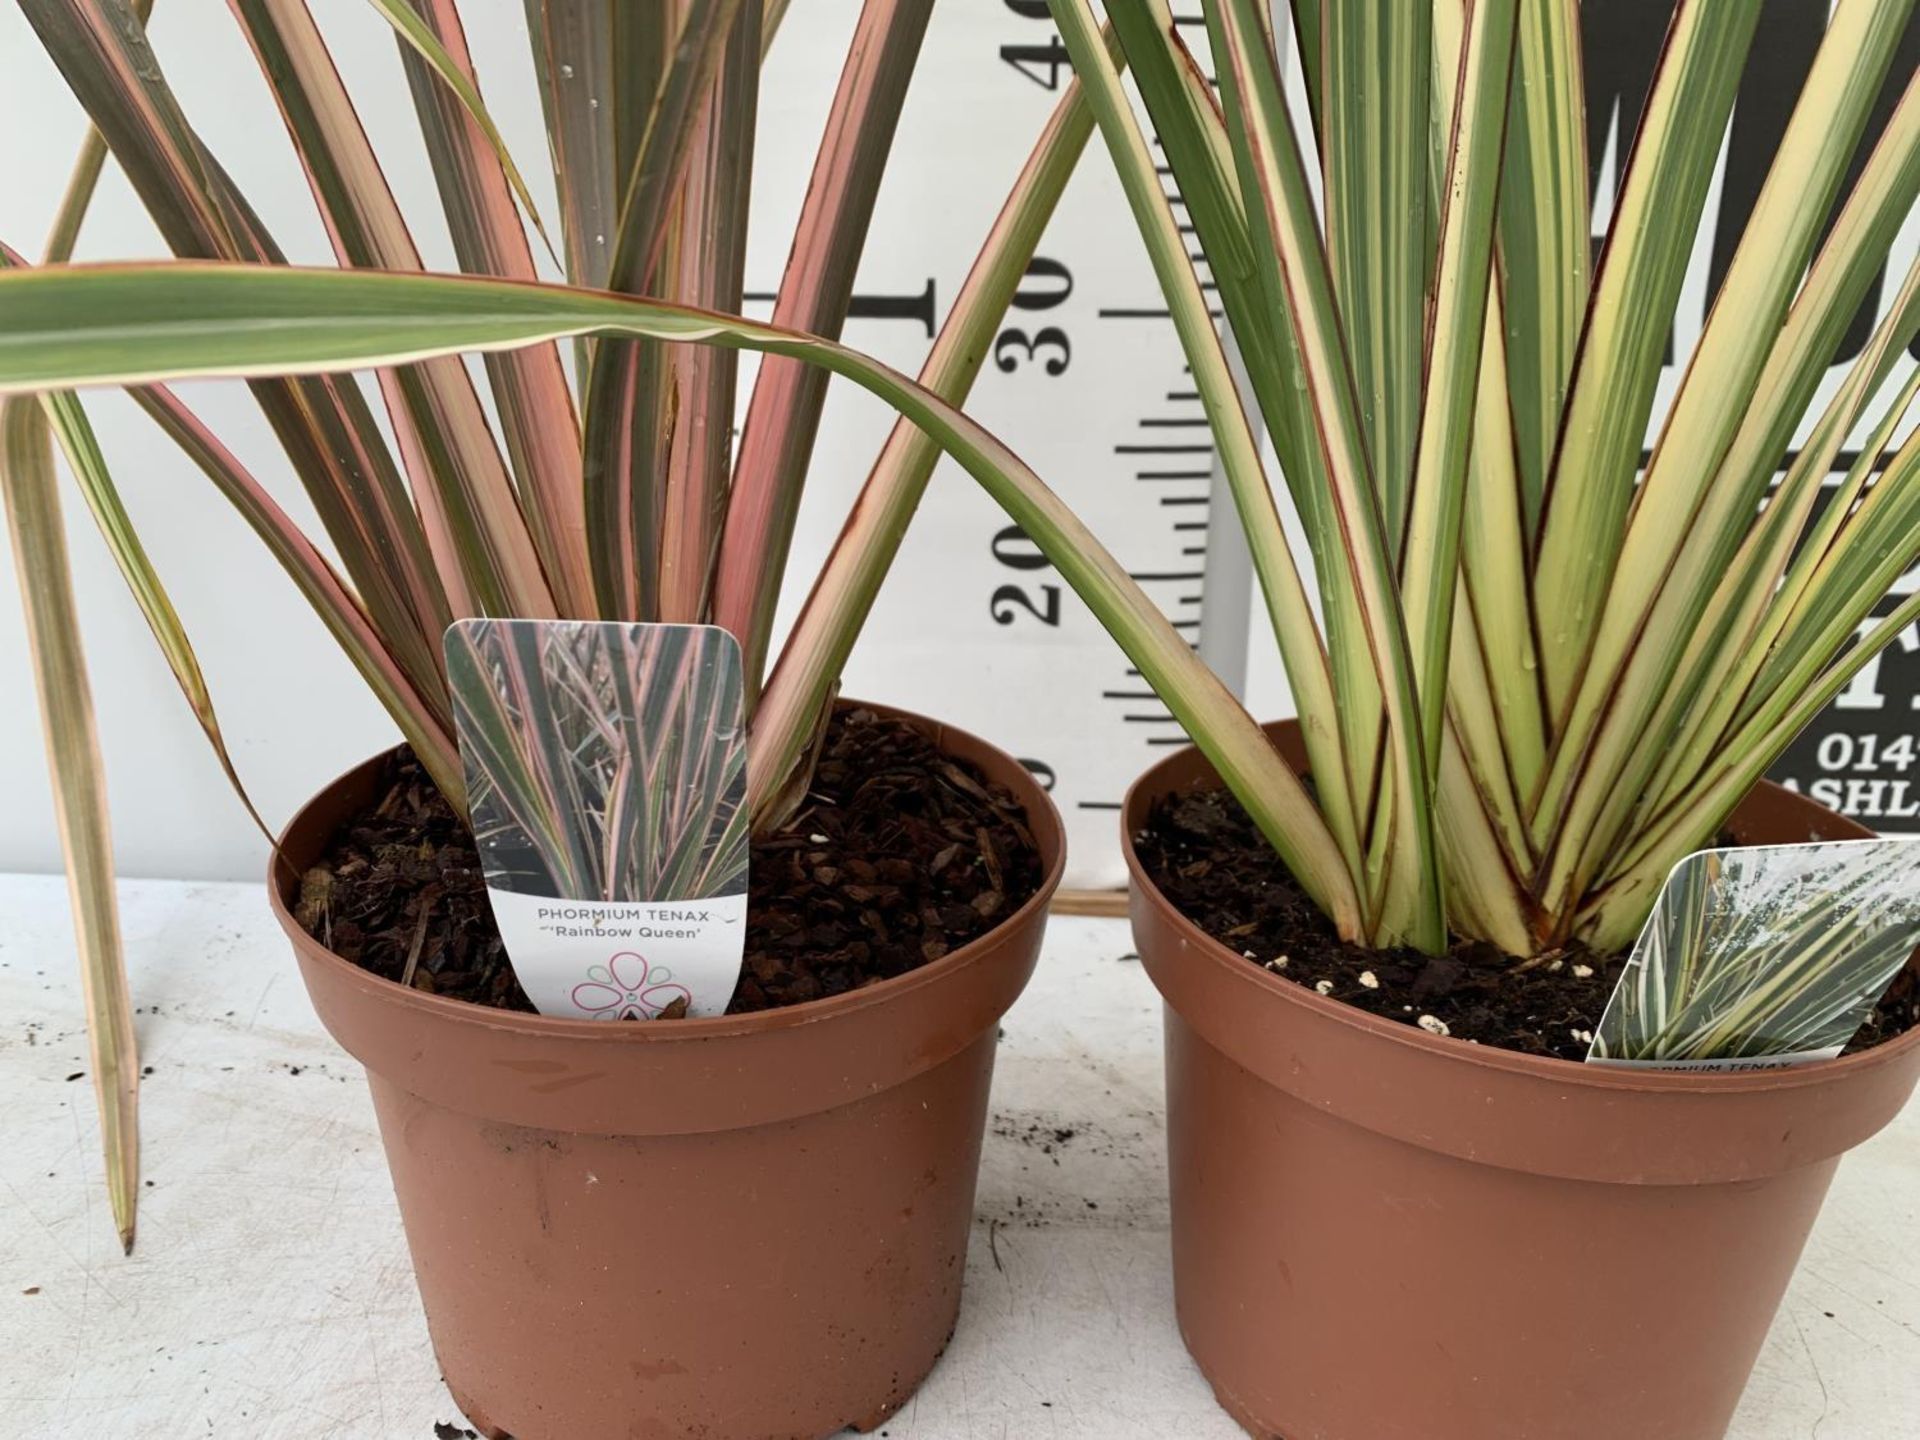 TWO PHORMIUM TENAX PLANTS 'TRICOLOUR' AND 'RAINBOW QUEEN' APPROX ONE METRE IN HEIGHT IN 3LTR POTS - Image 5 of 8